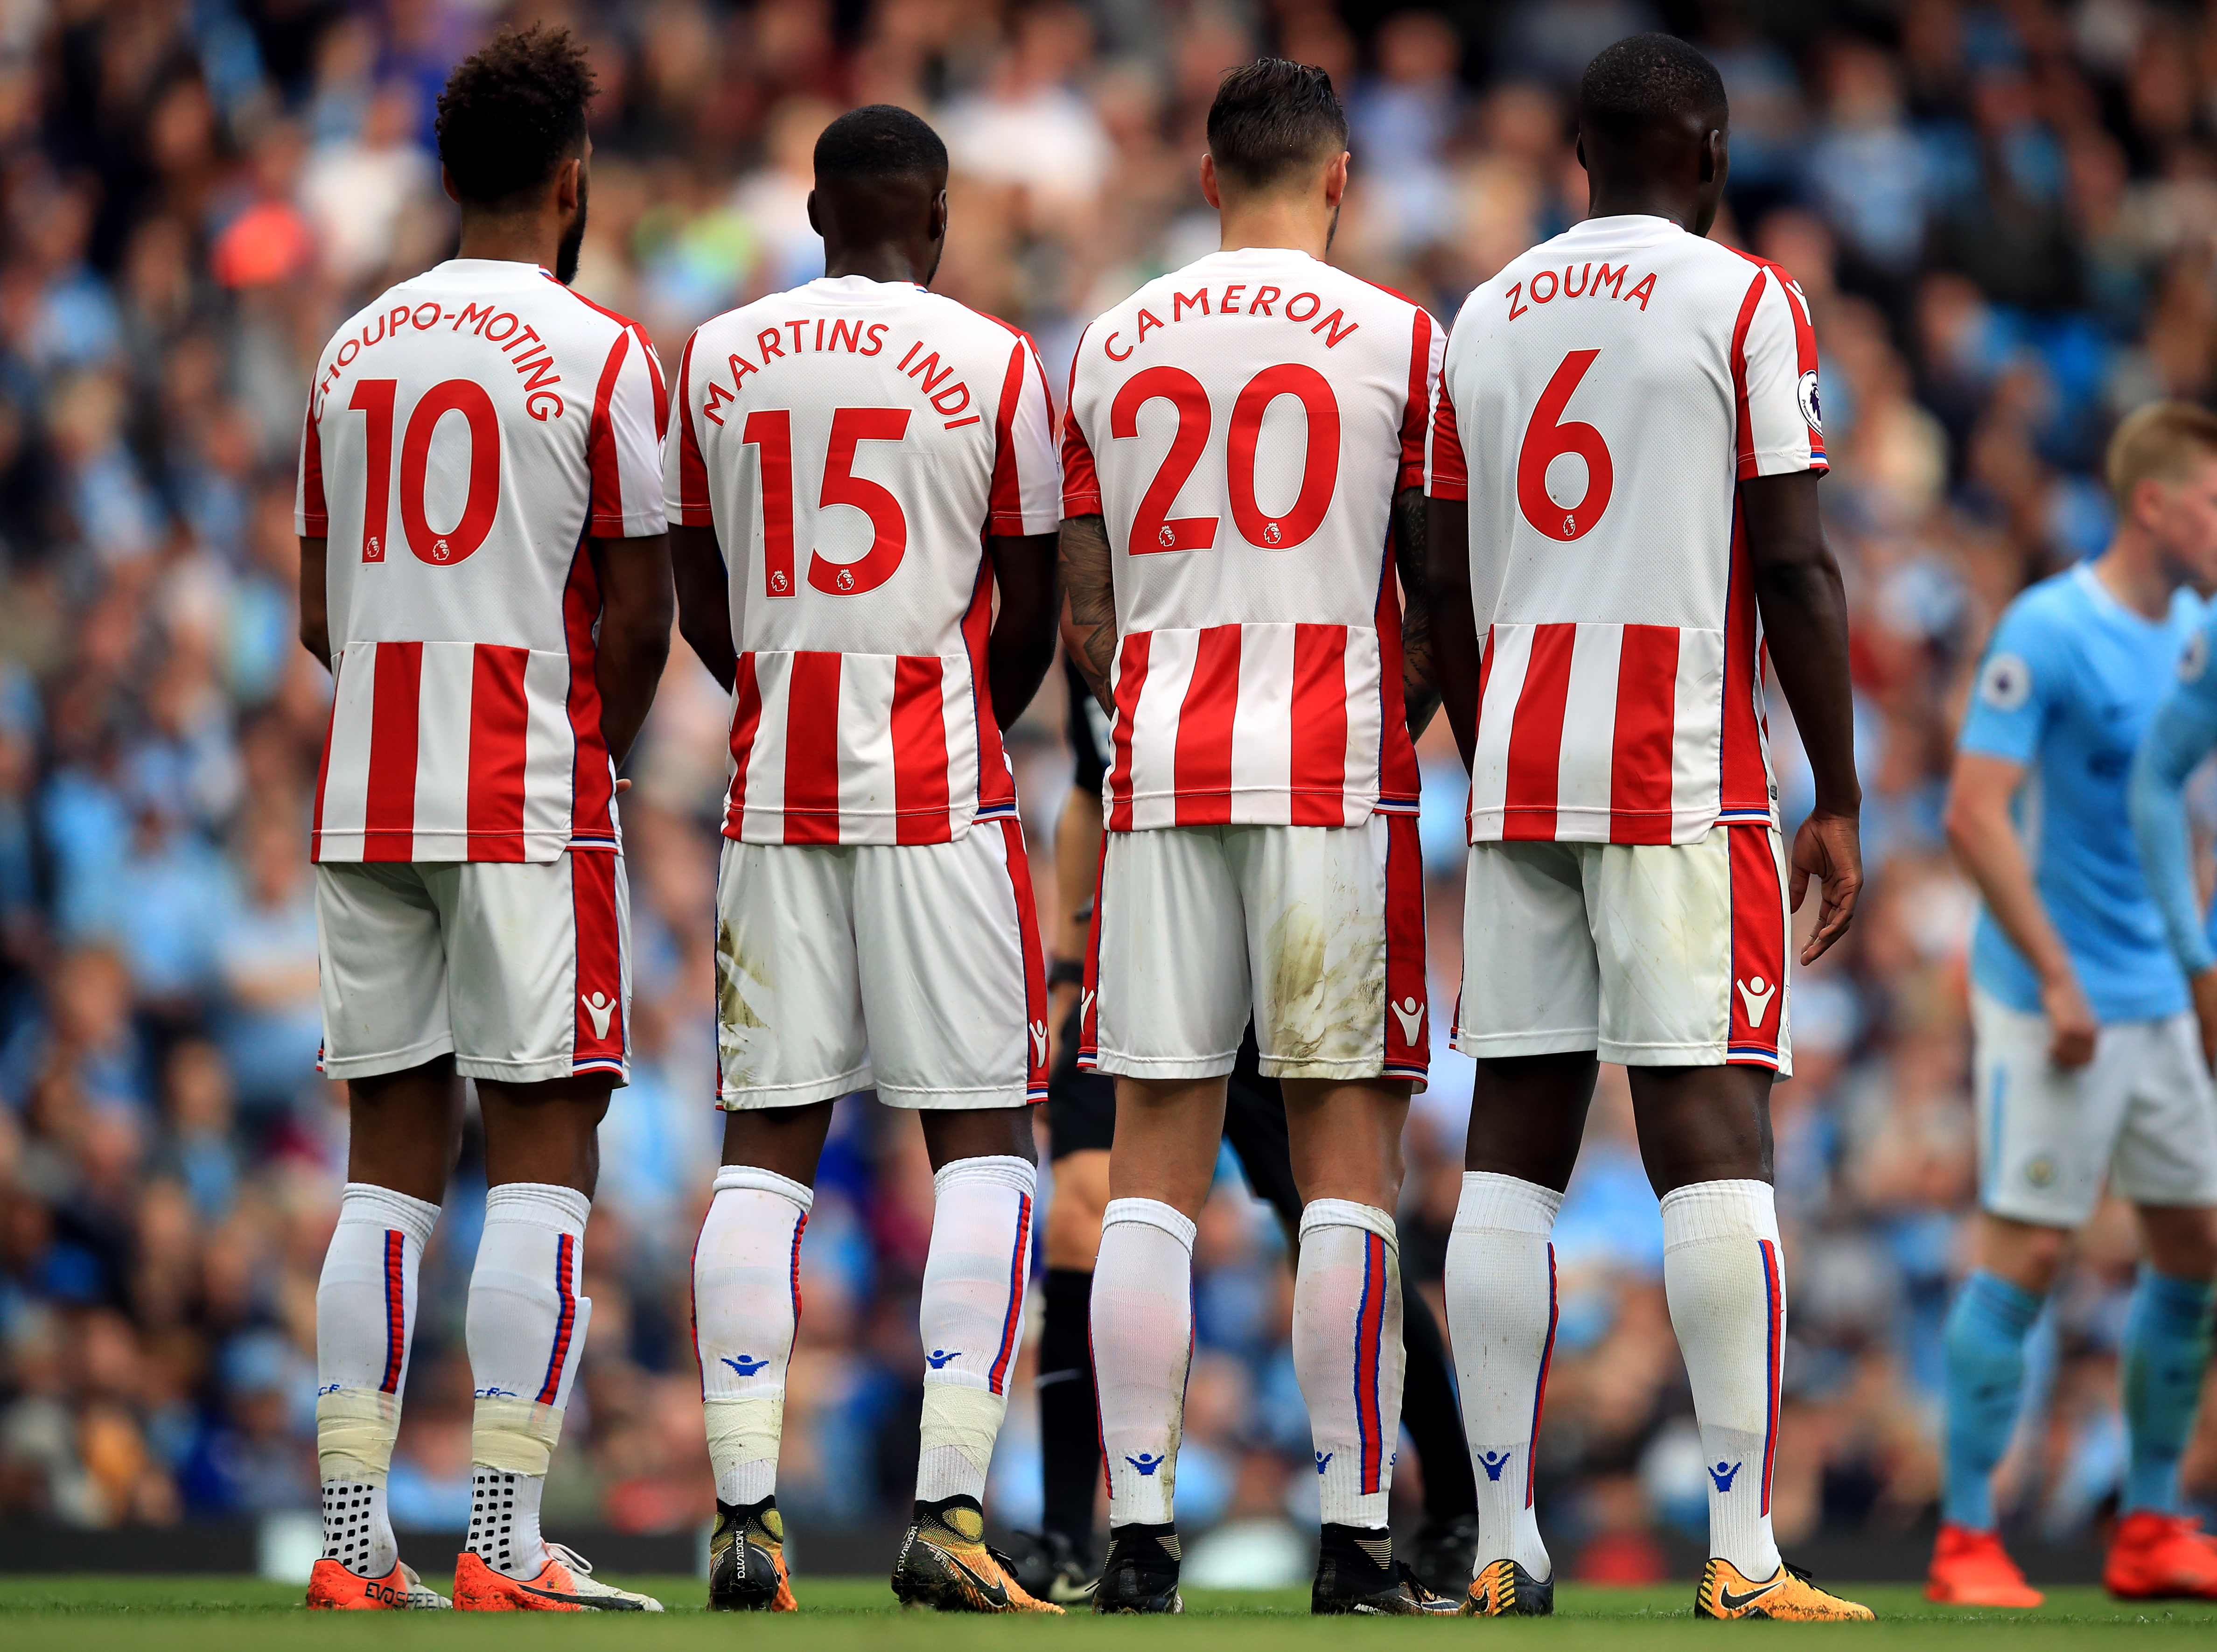 Stoke City footballers form a wall for a free-kick